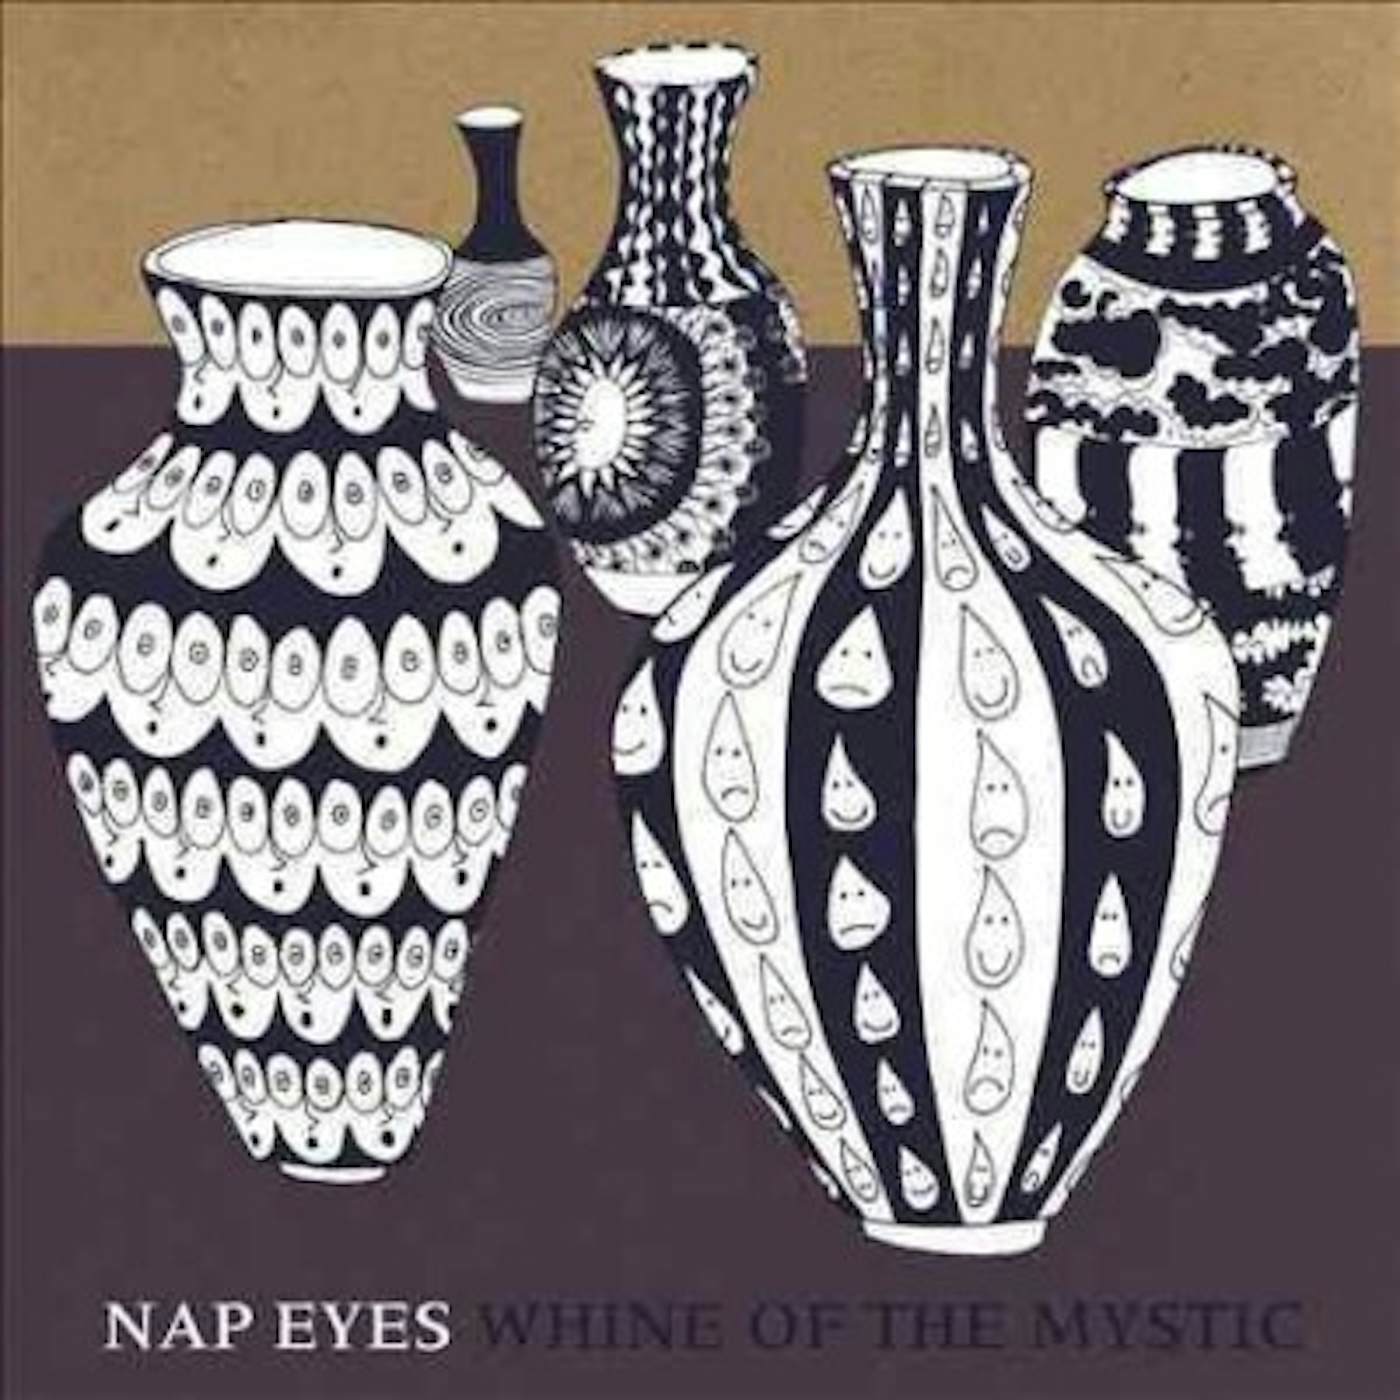 Nap Eyes Whine of the Mystic Vinyl Record